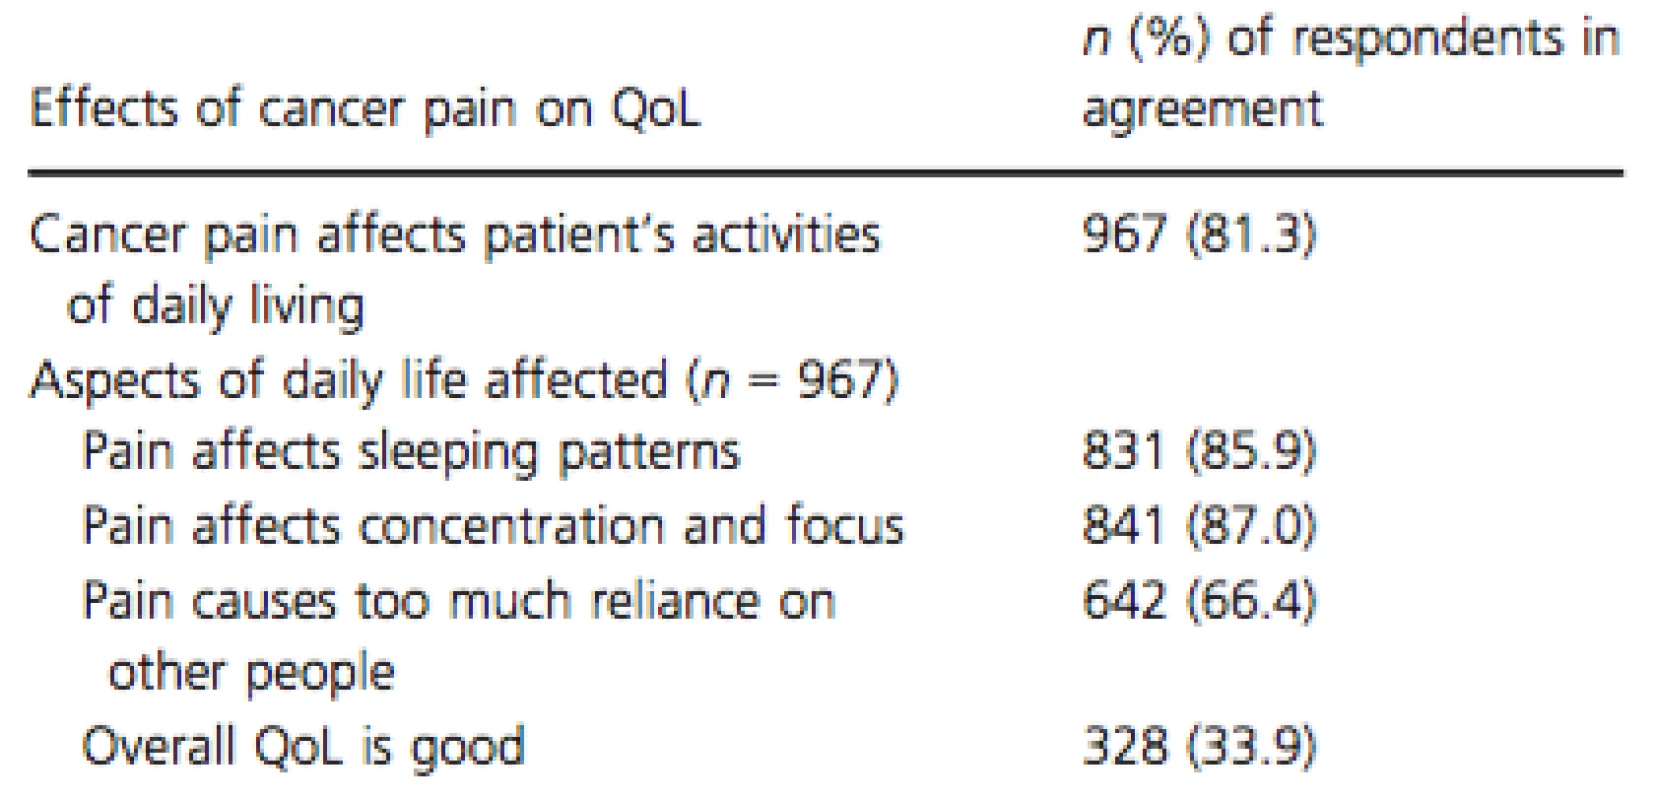 Effects of cancer pain on patients' quality of life (QoL, n = 1190)